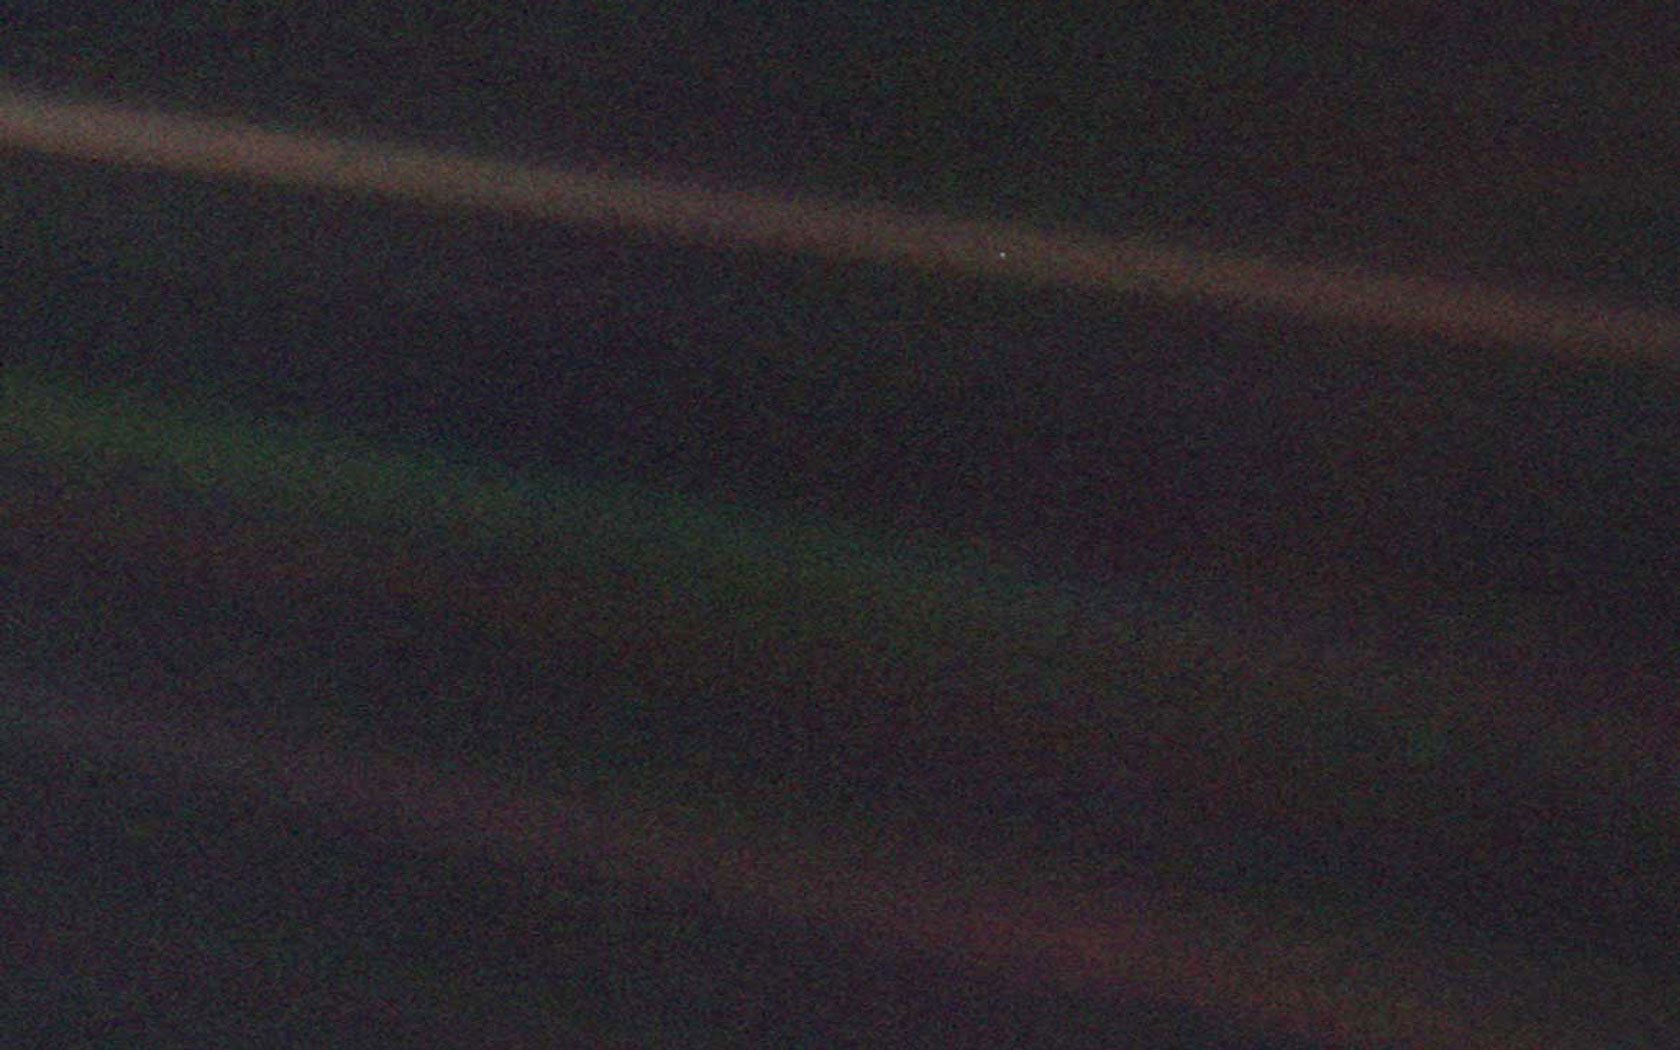 A Pale Blue Dot The Ultimate Earth selfie  TEDEd